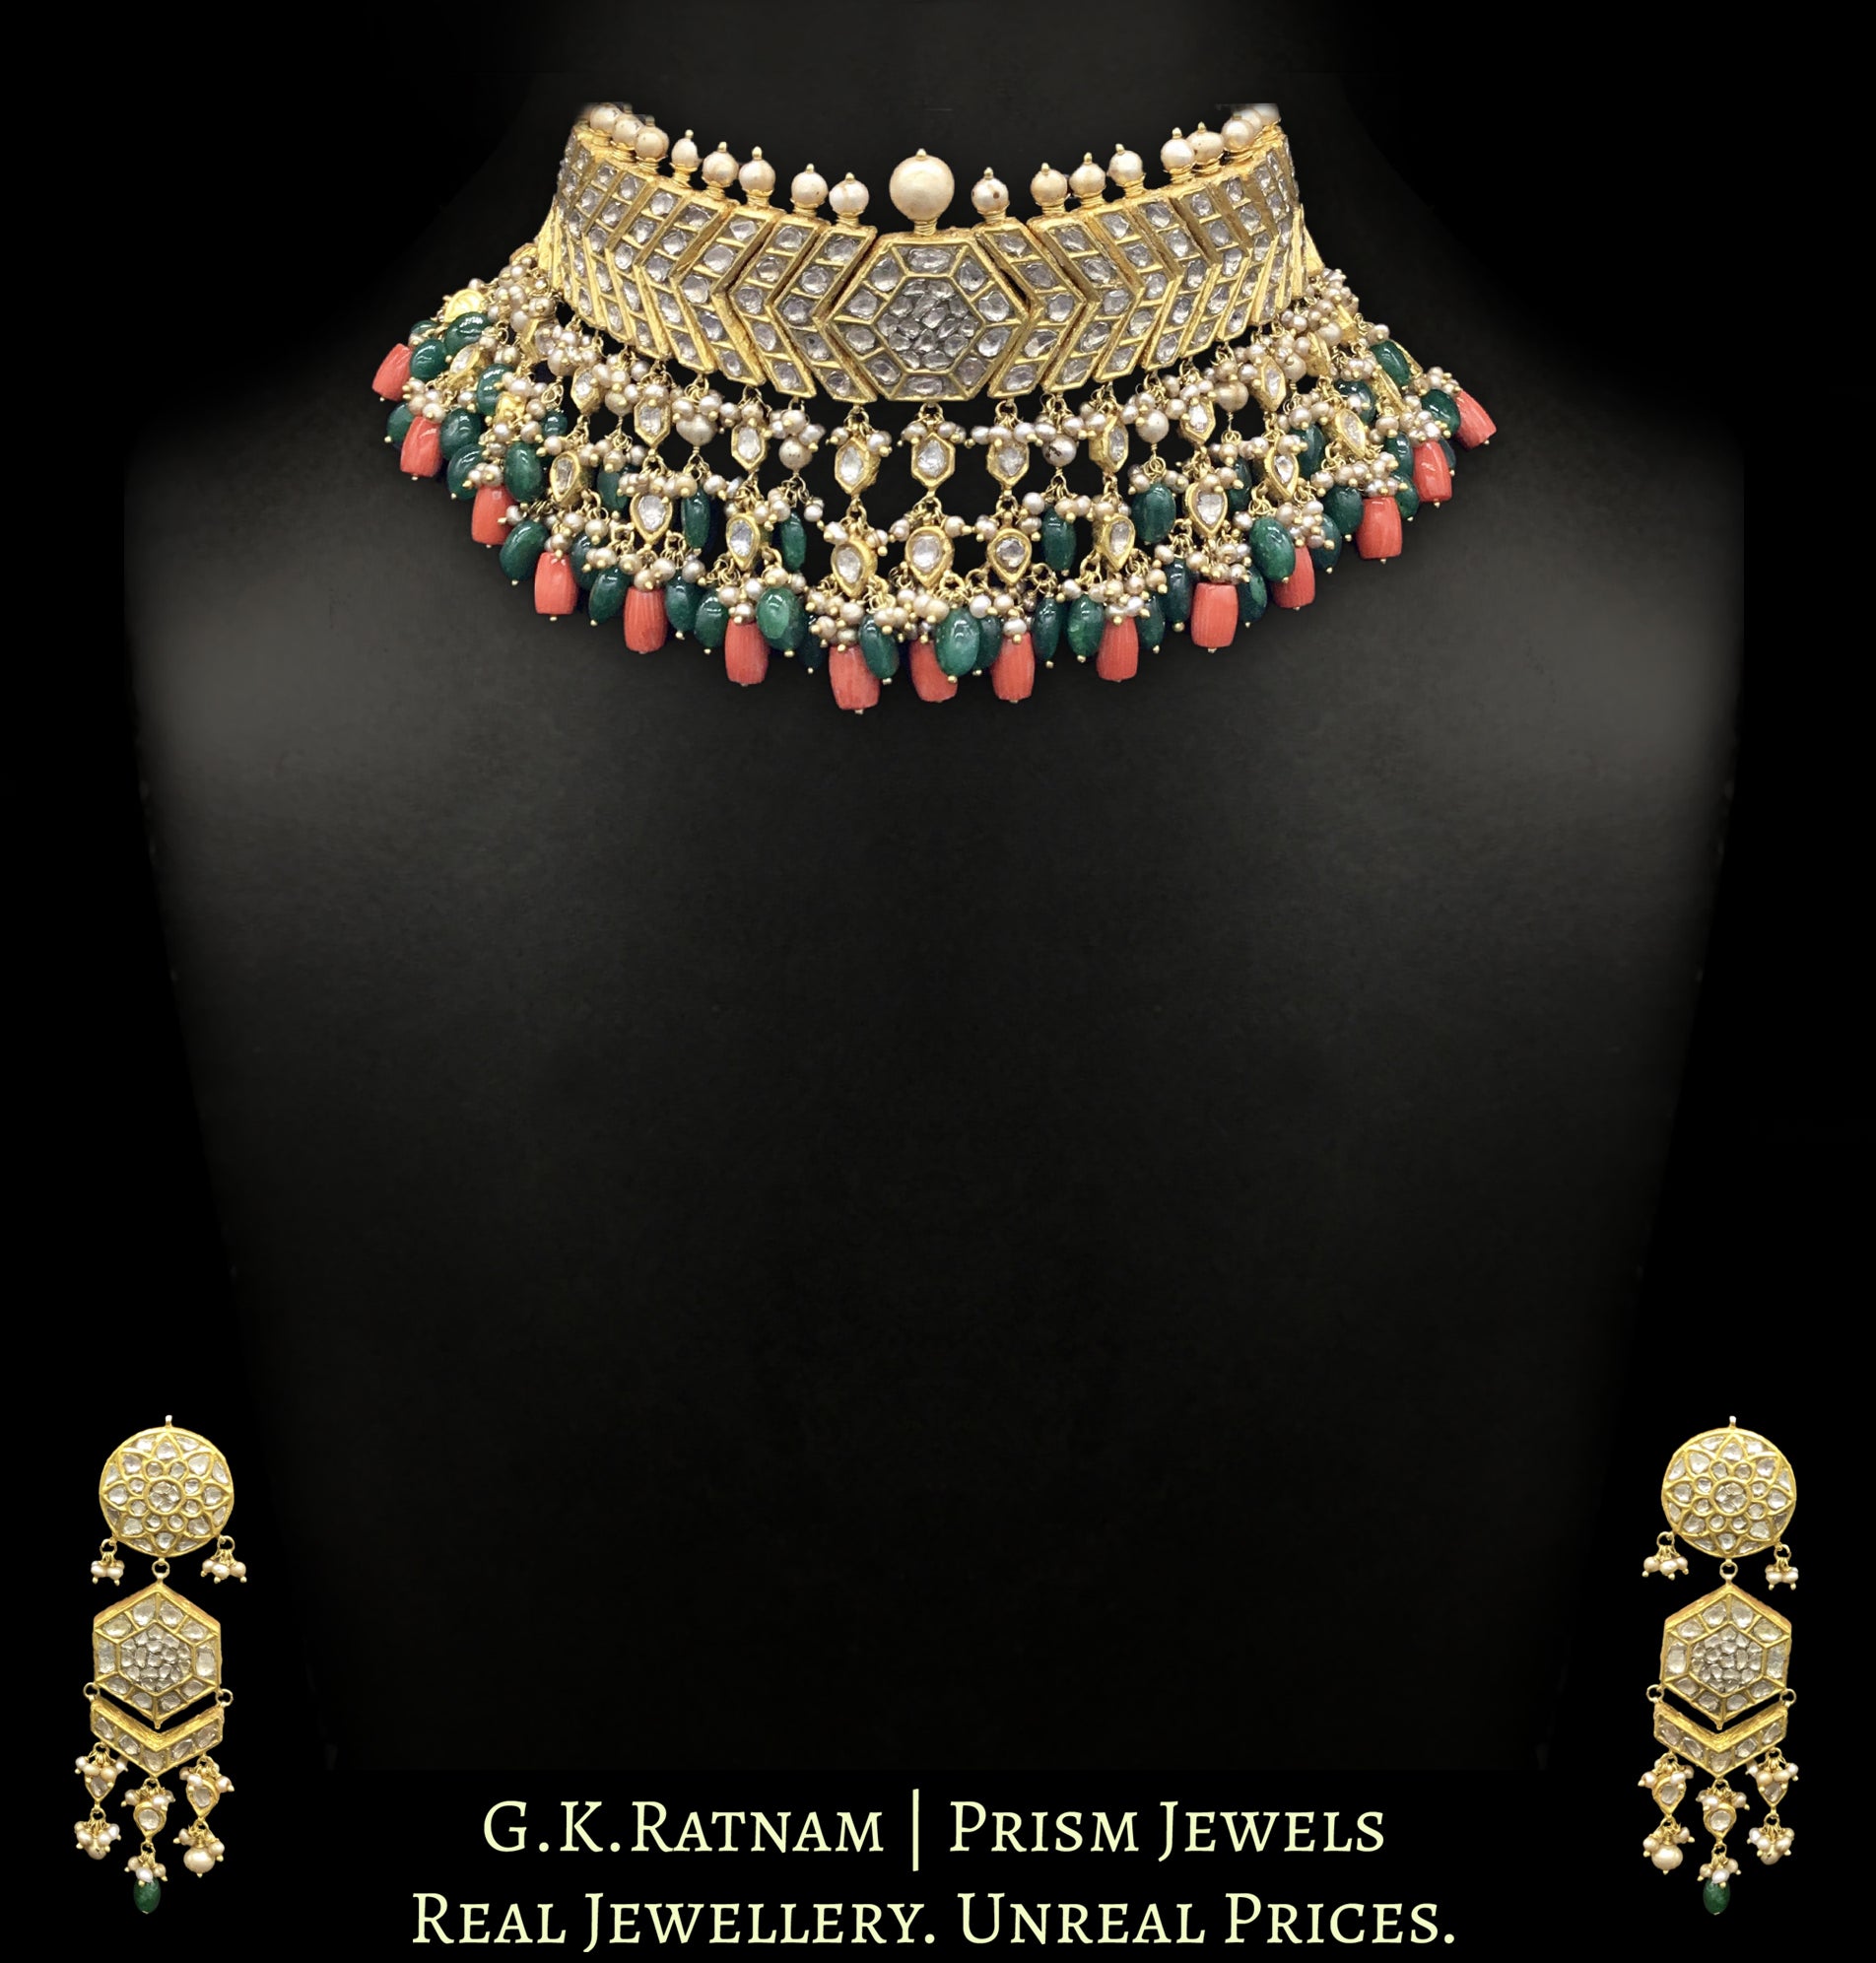 23k Gold and Diamond Polki Choker Necklace Set with Corals, Beryls and Antiqued Hyderabadi Pearls